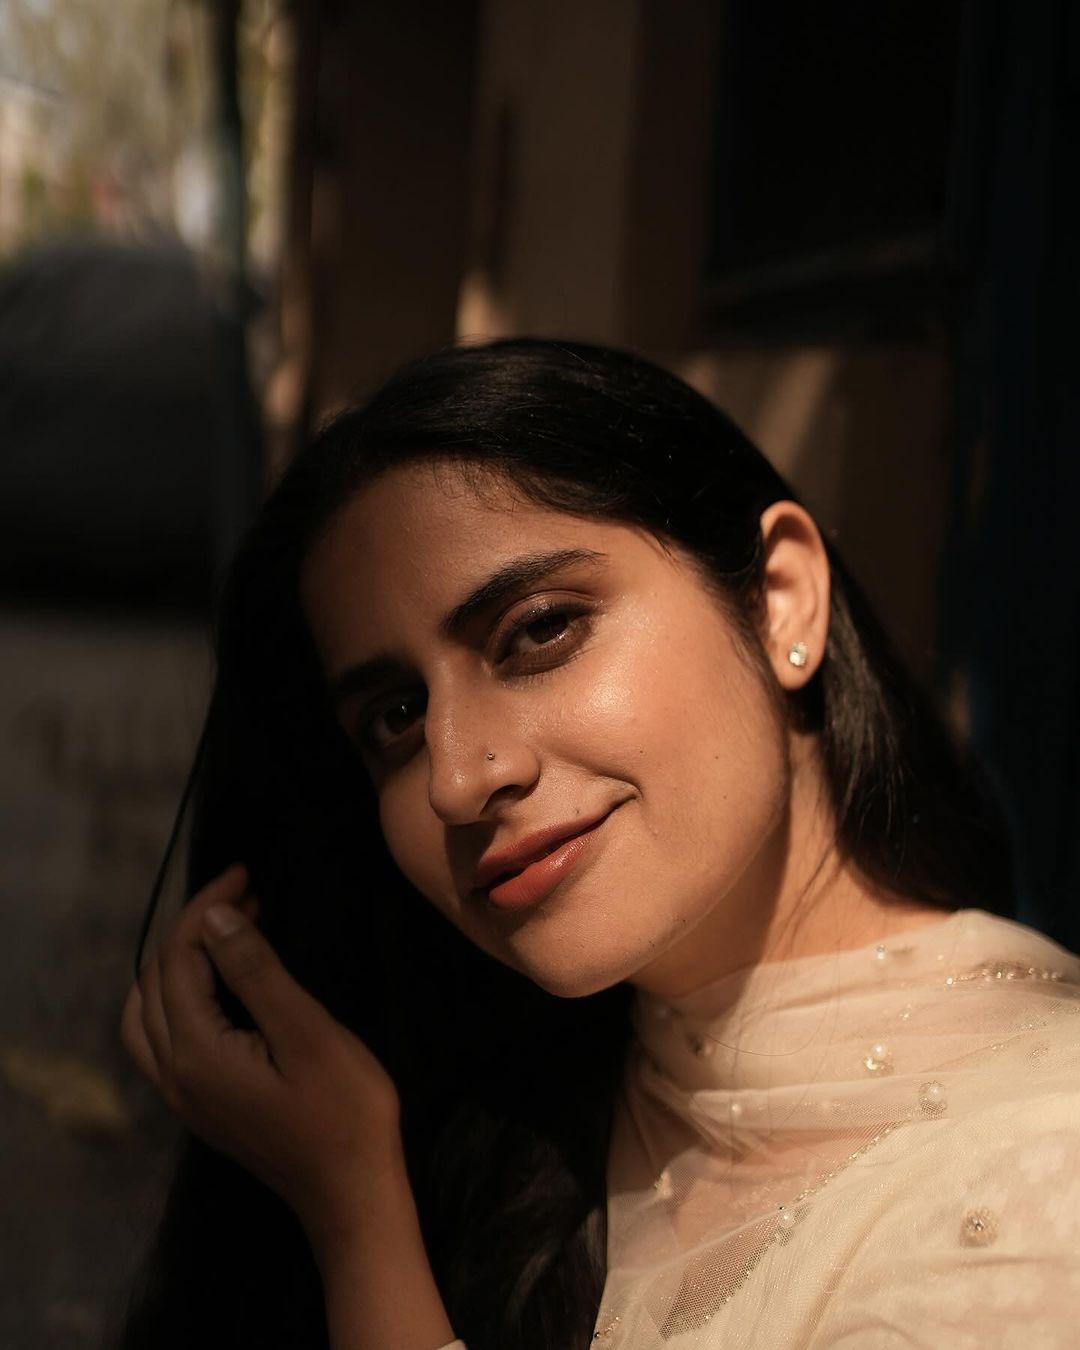 Ankita Sahigal, a content creator since 2020, has collaborated with over 50 brands, including Google India, YouTube India, Tinder, and consumer brands such as Maggi, Whisper, and Maybelline in 2023. This year she has her sights set on the National Creative Creator Award.